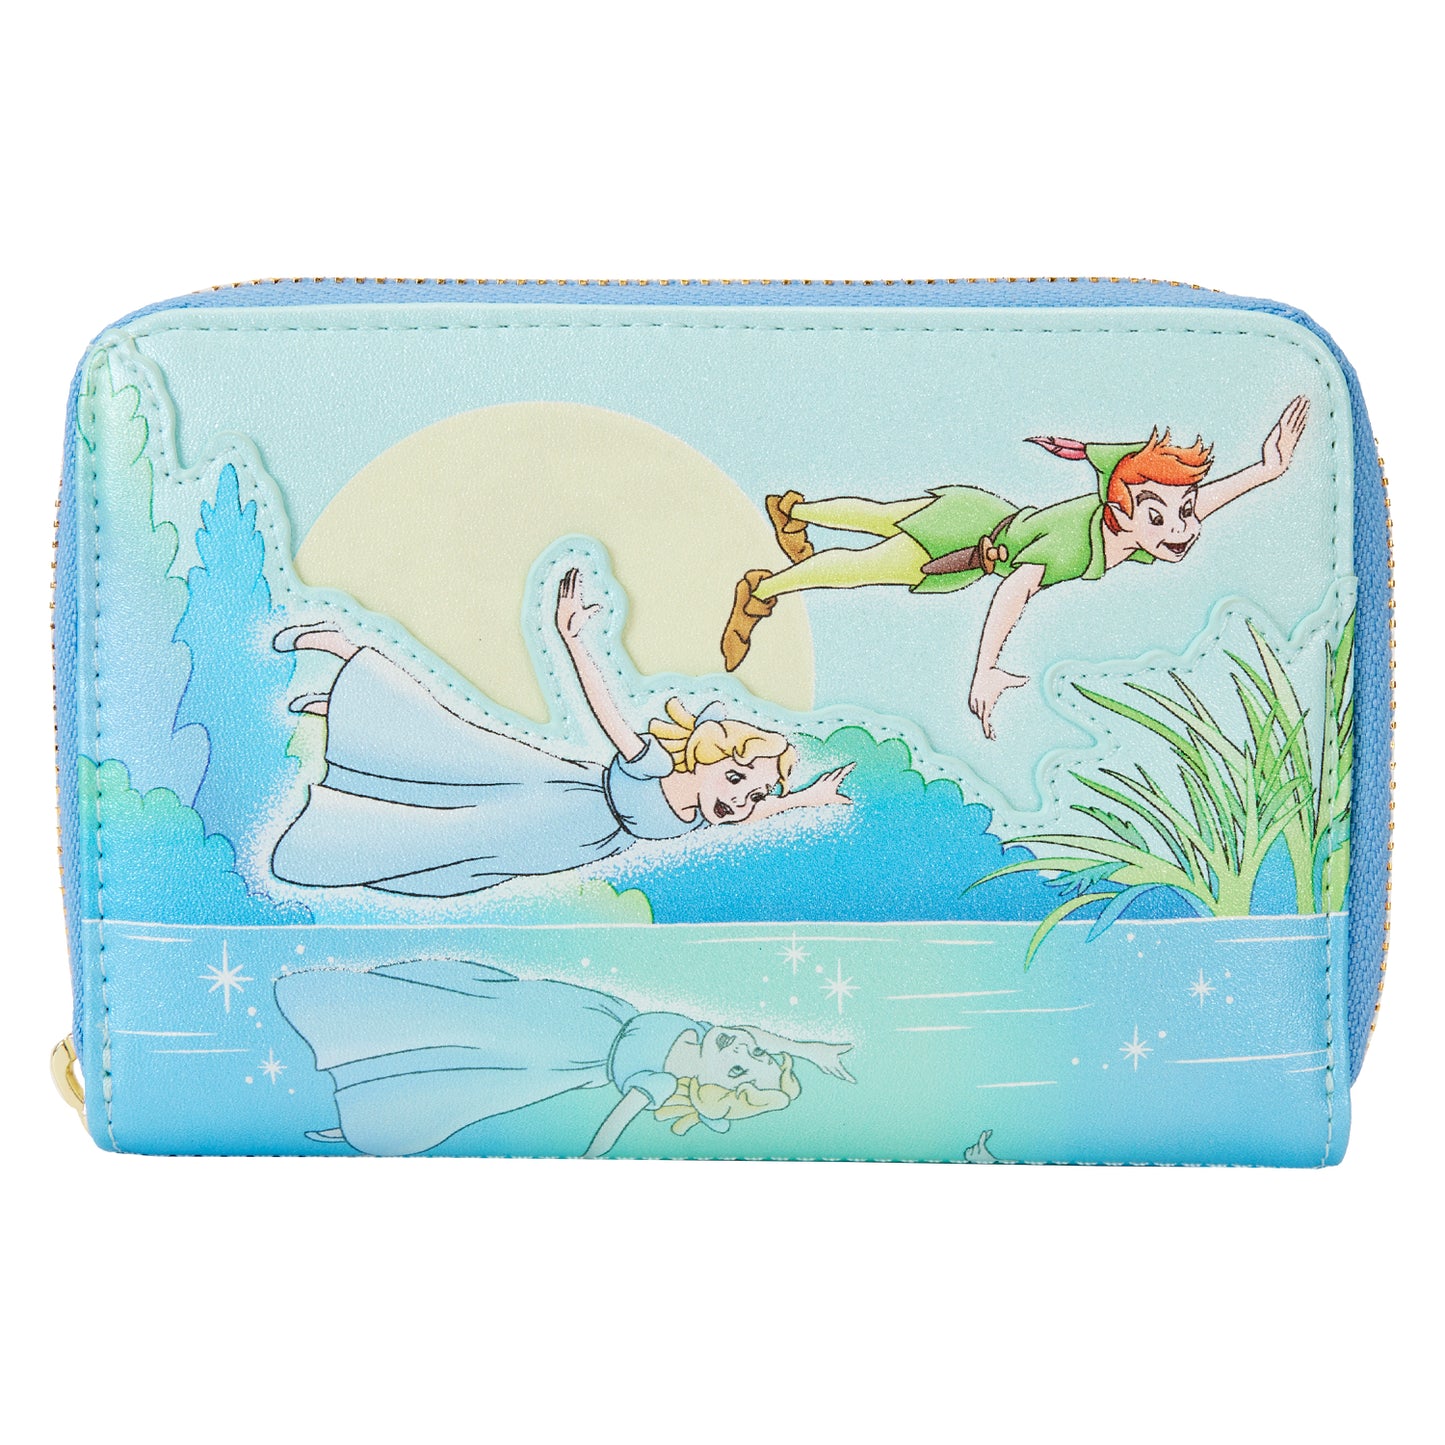 Peter Pan You Can Fly Glow Zip Around Wallet LFY